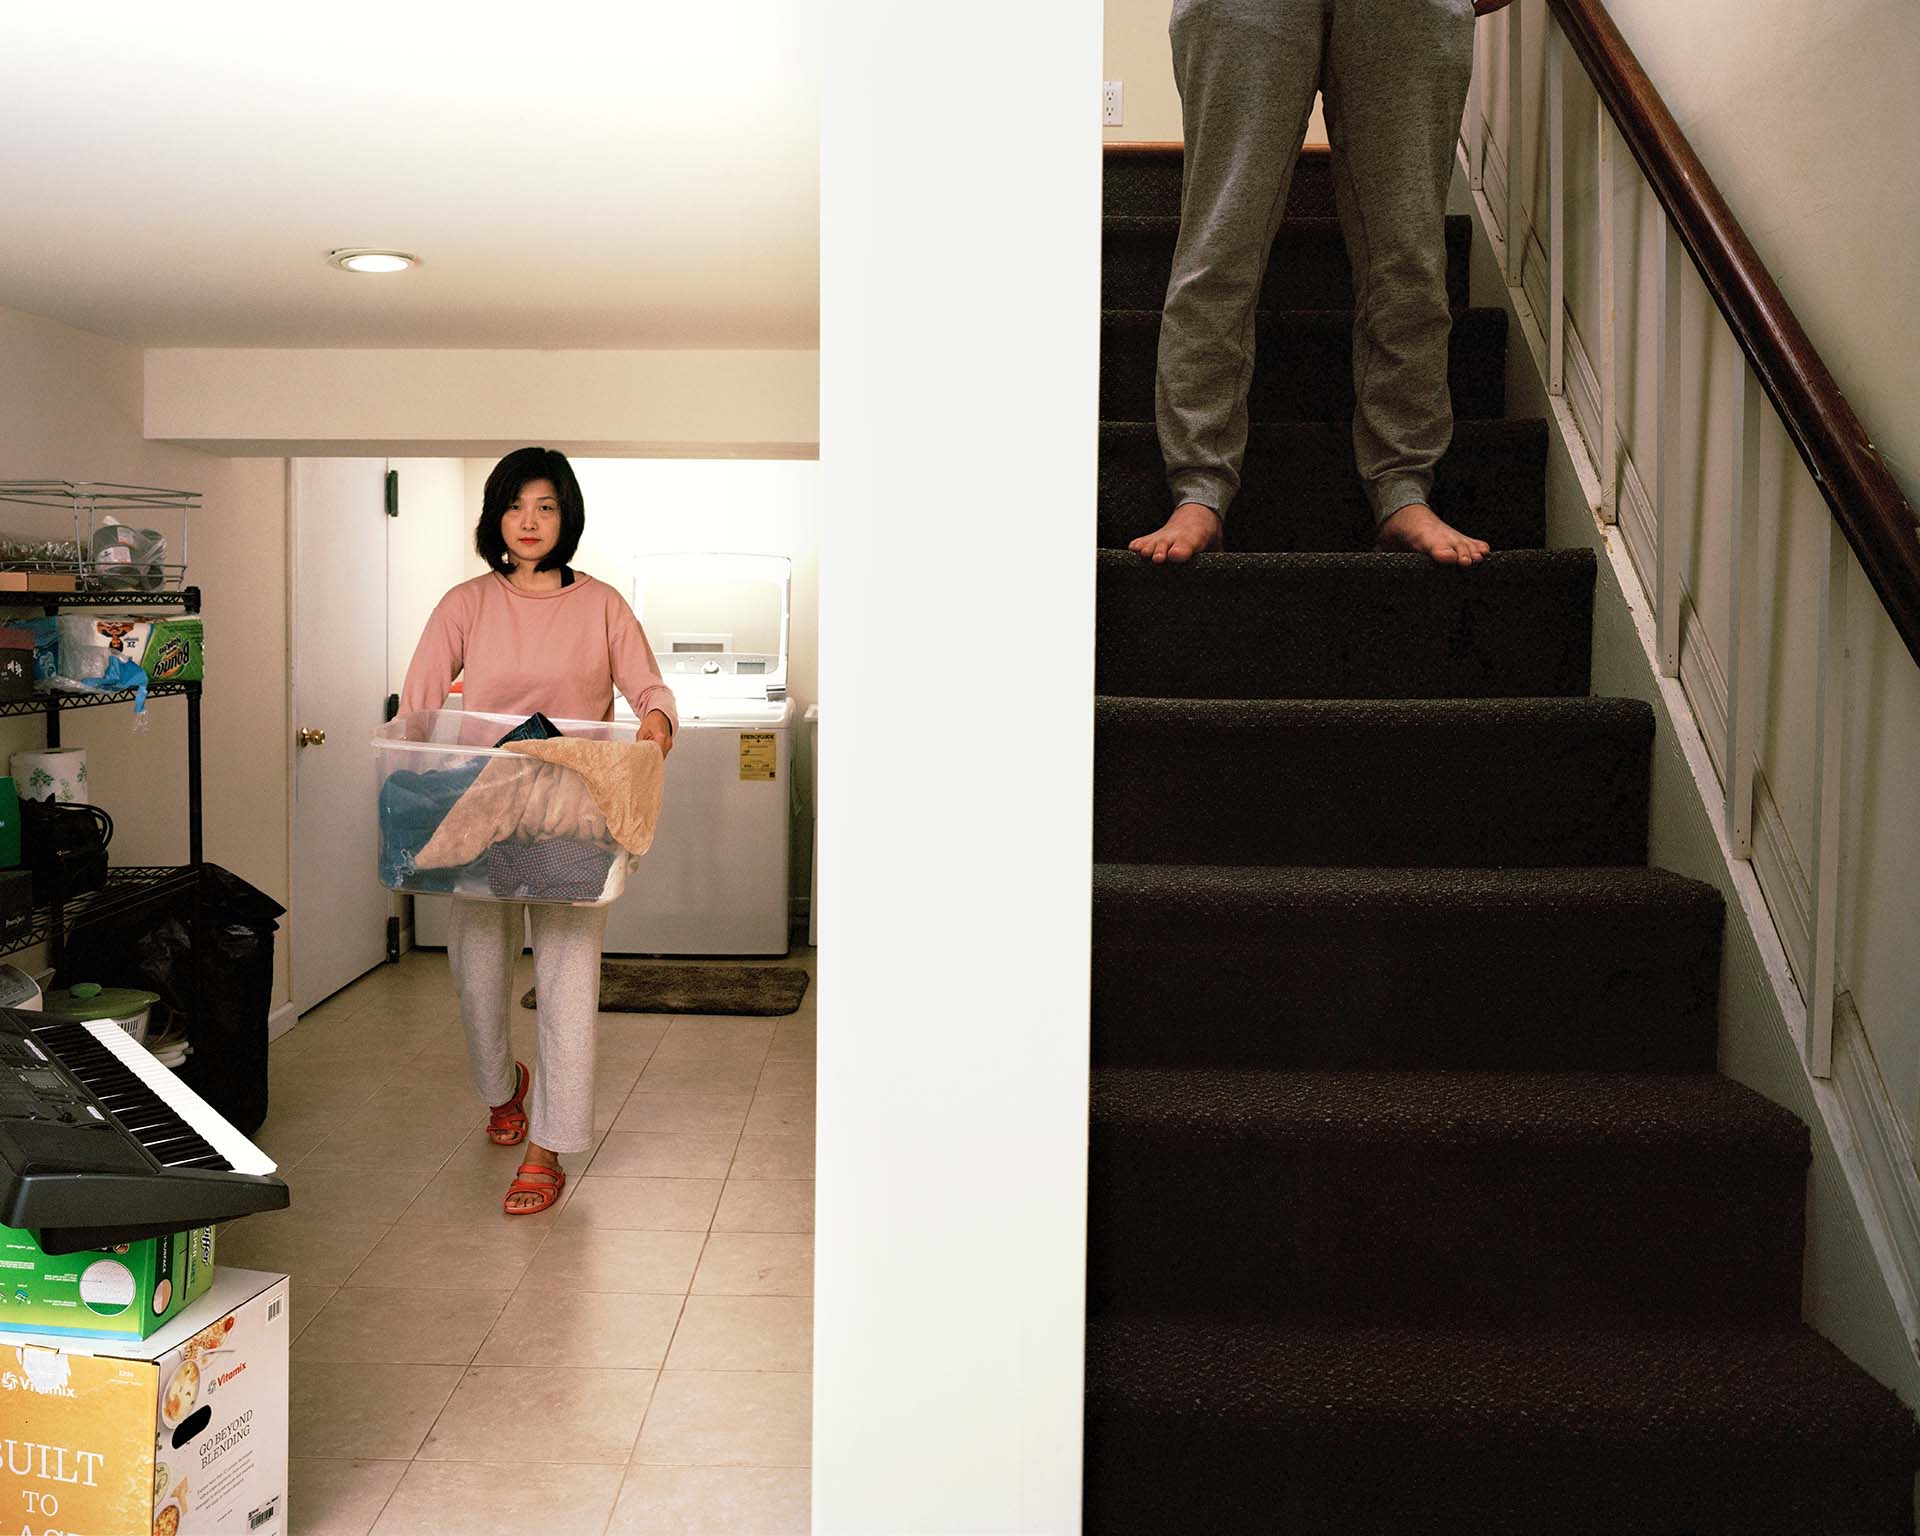 person in basement, frame split by wall, person on stair